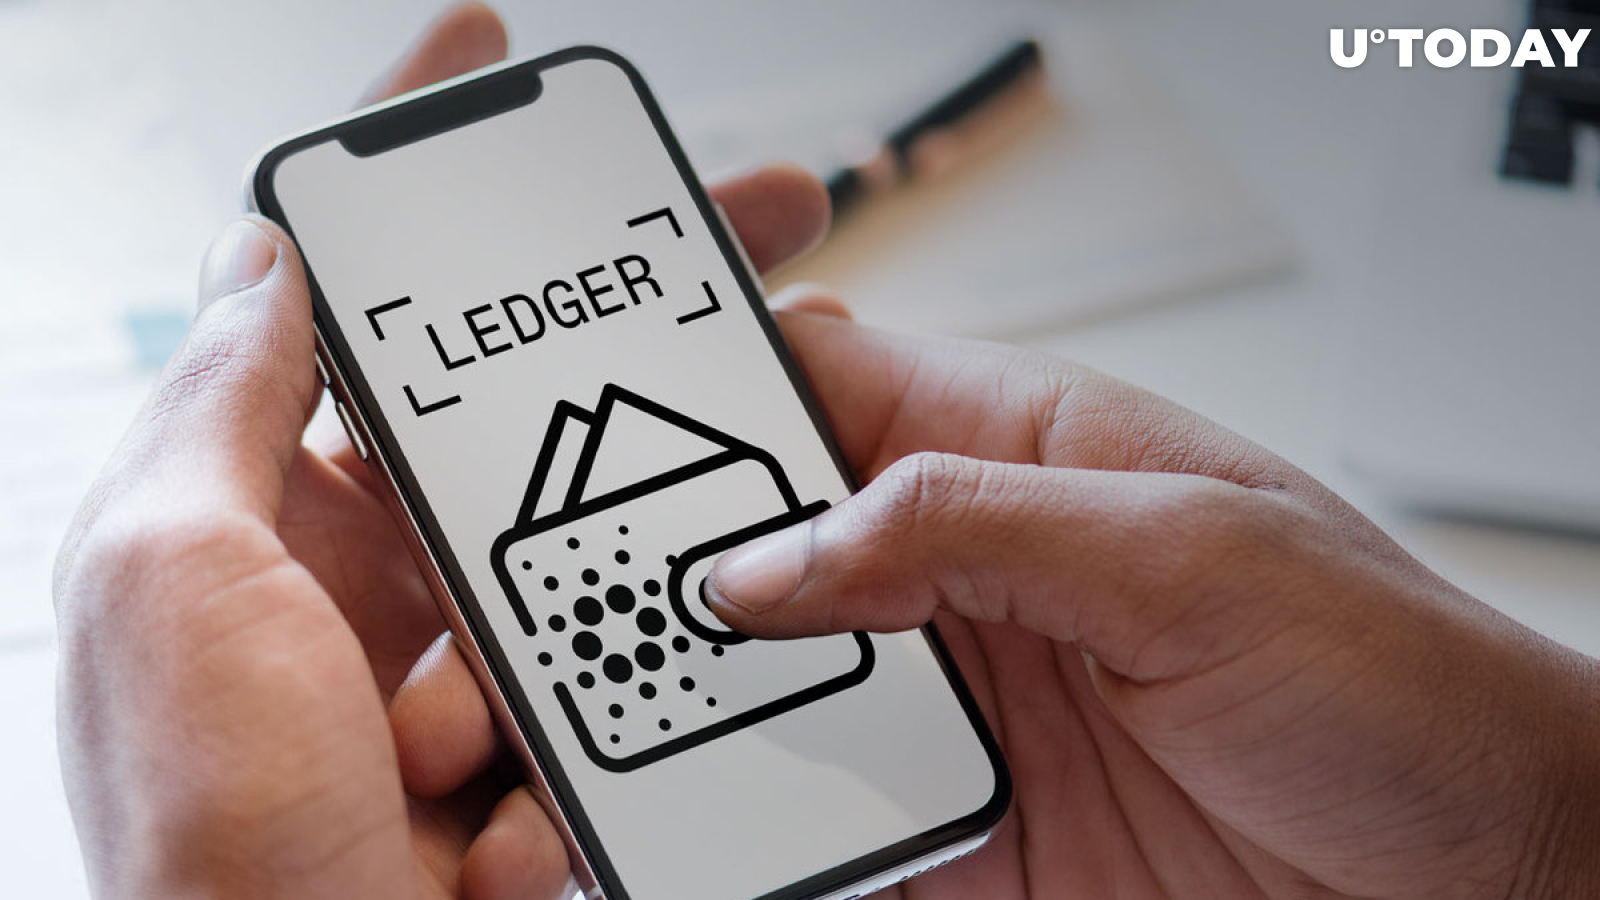 Cardano (ADA) Ledger Wallet Now Available on iOS Devices: Details